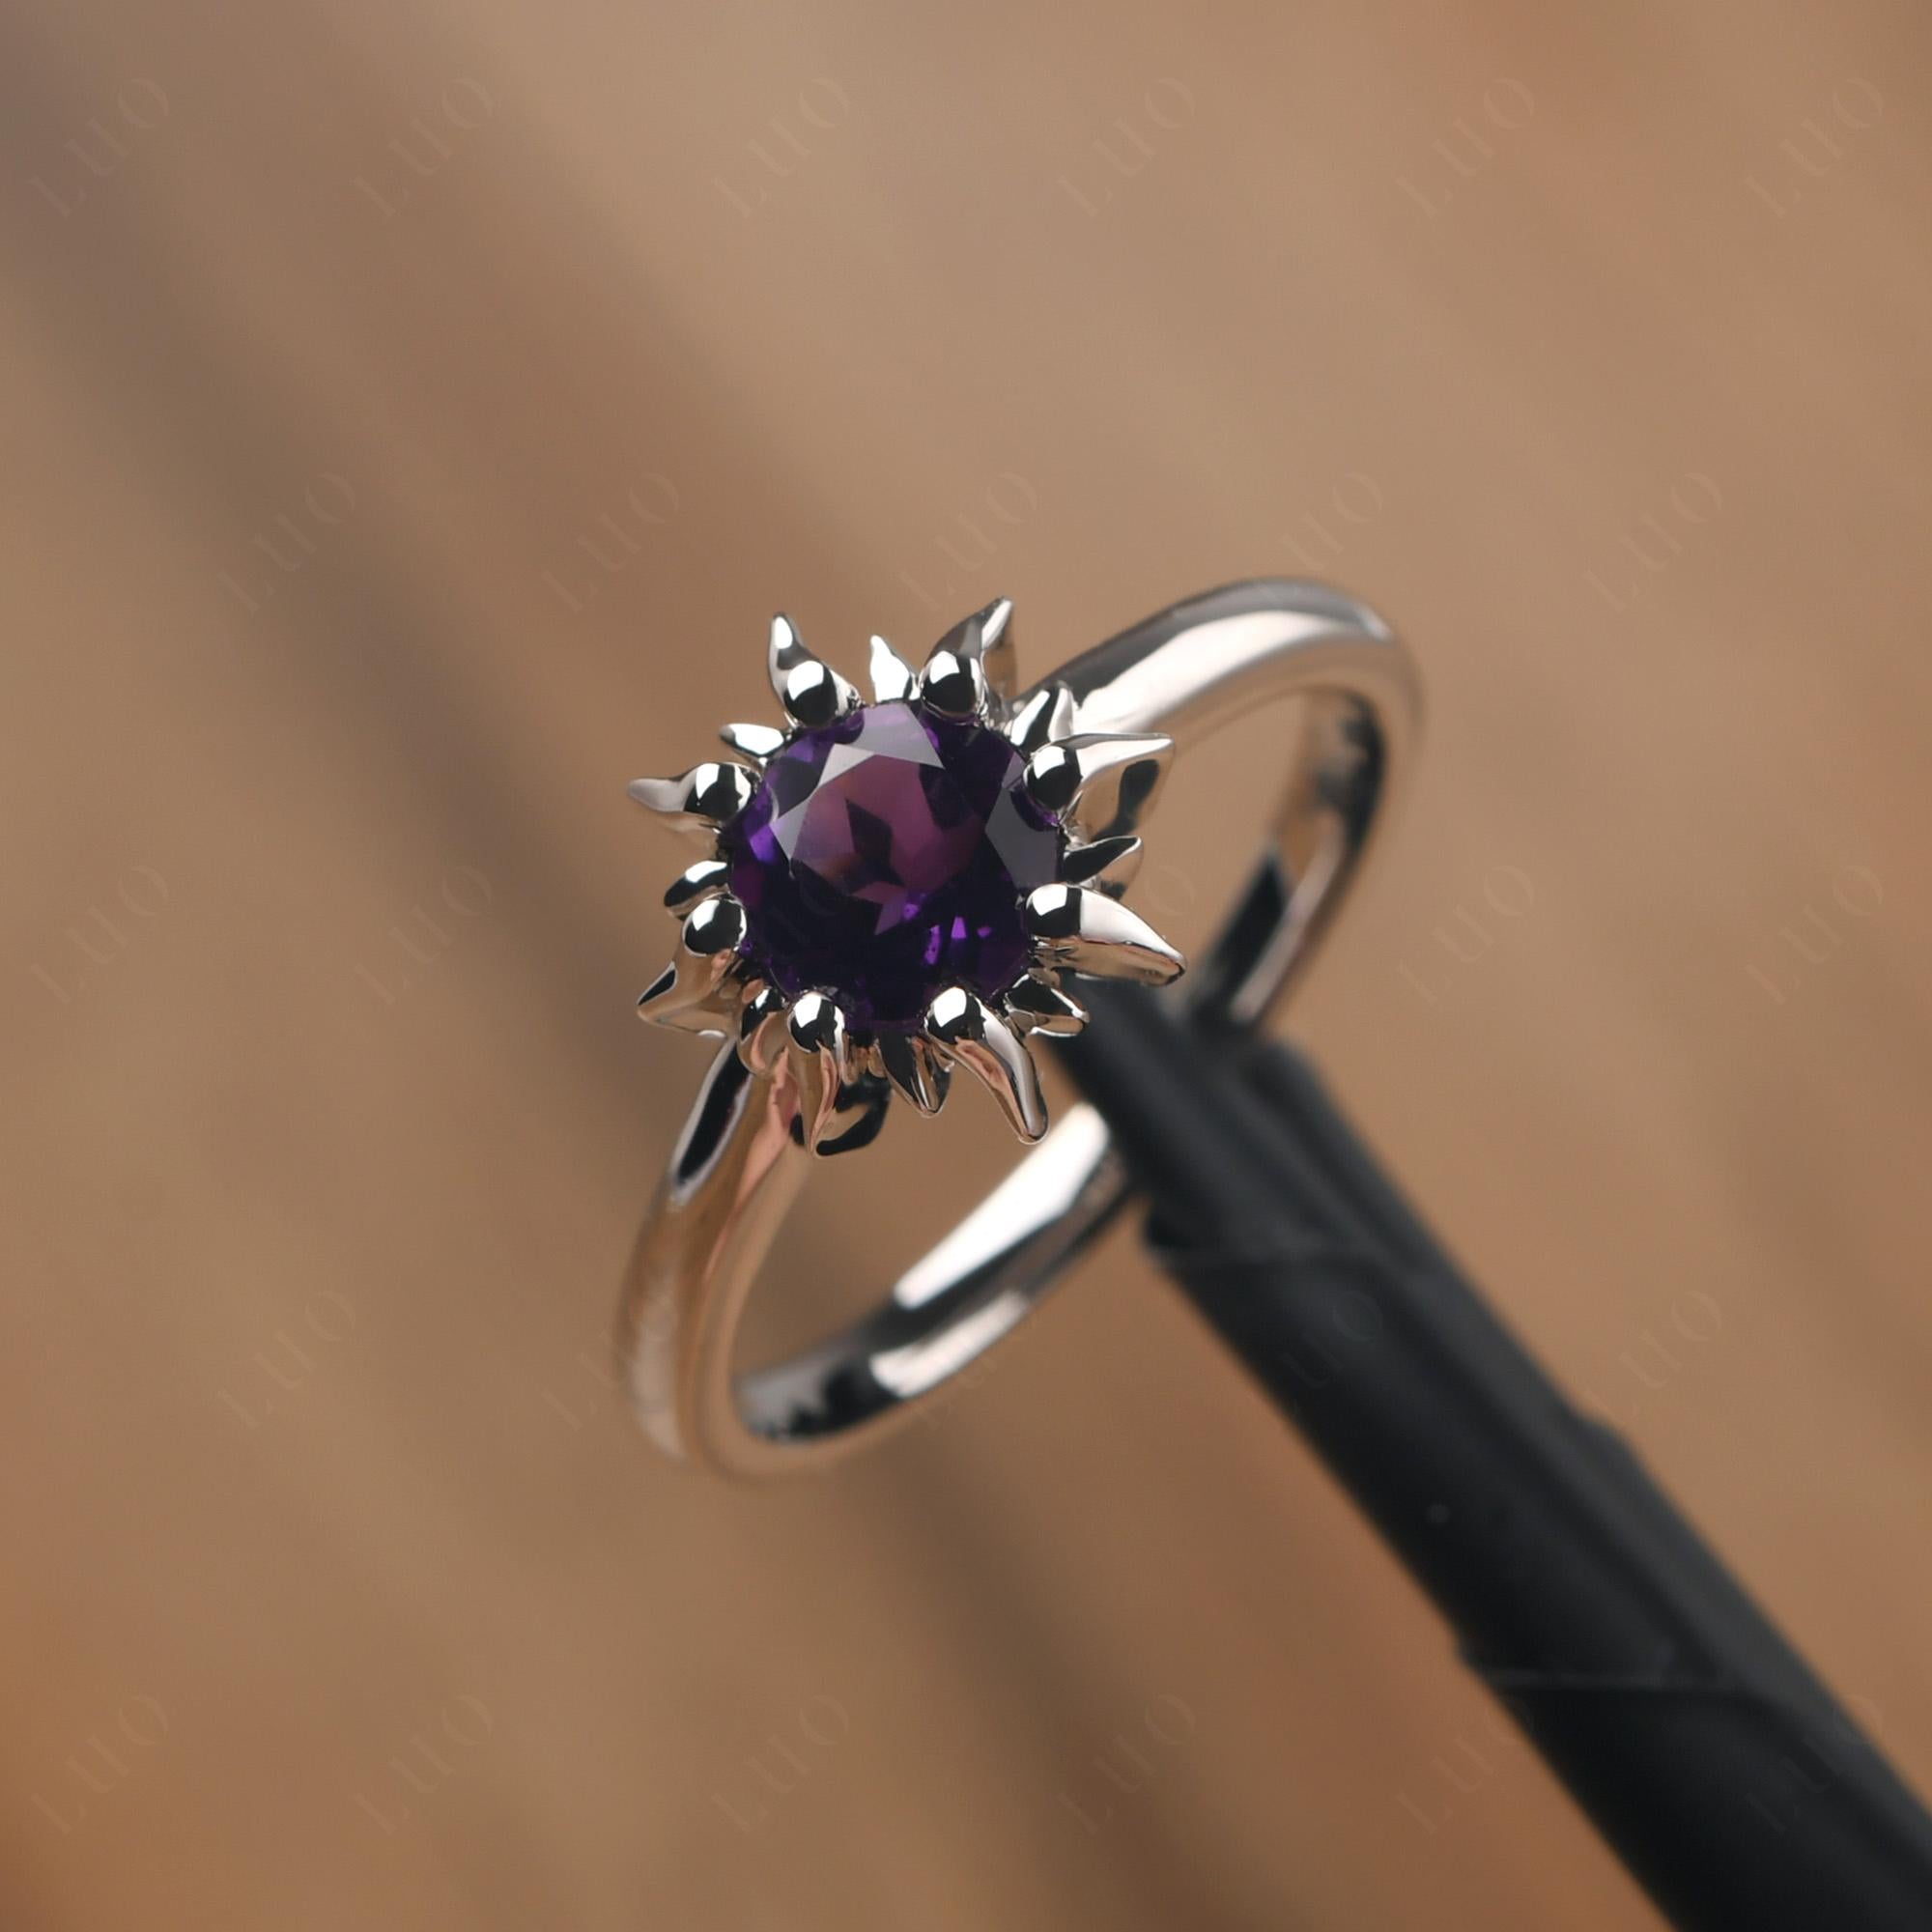 Sunburst Amethyst Solitaire Ring - LUO Jewelry